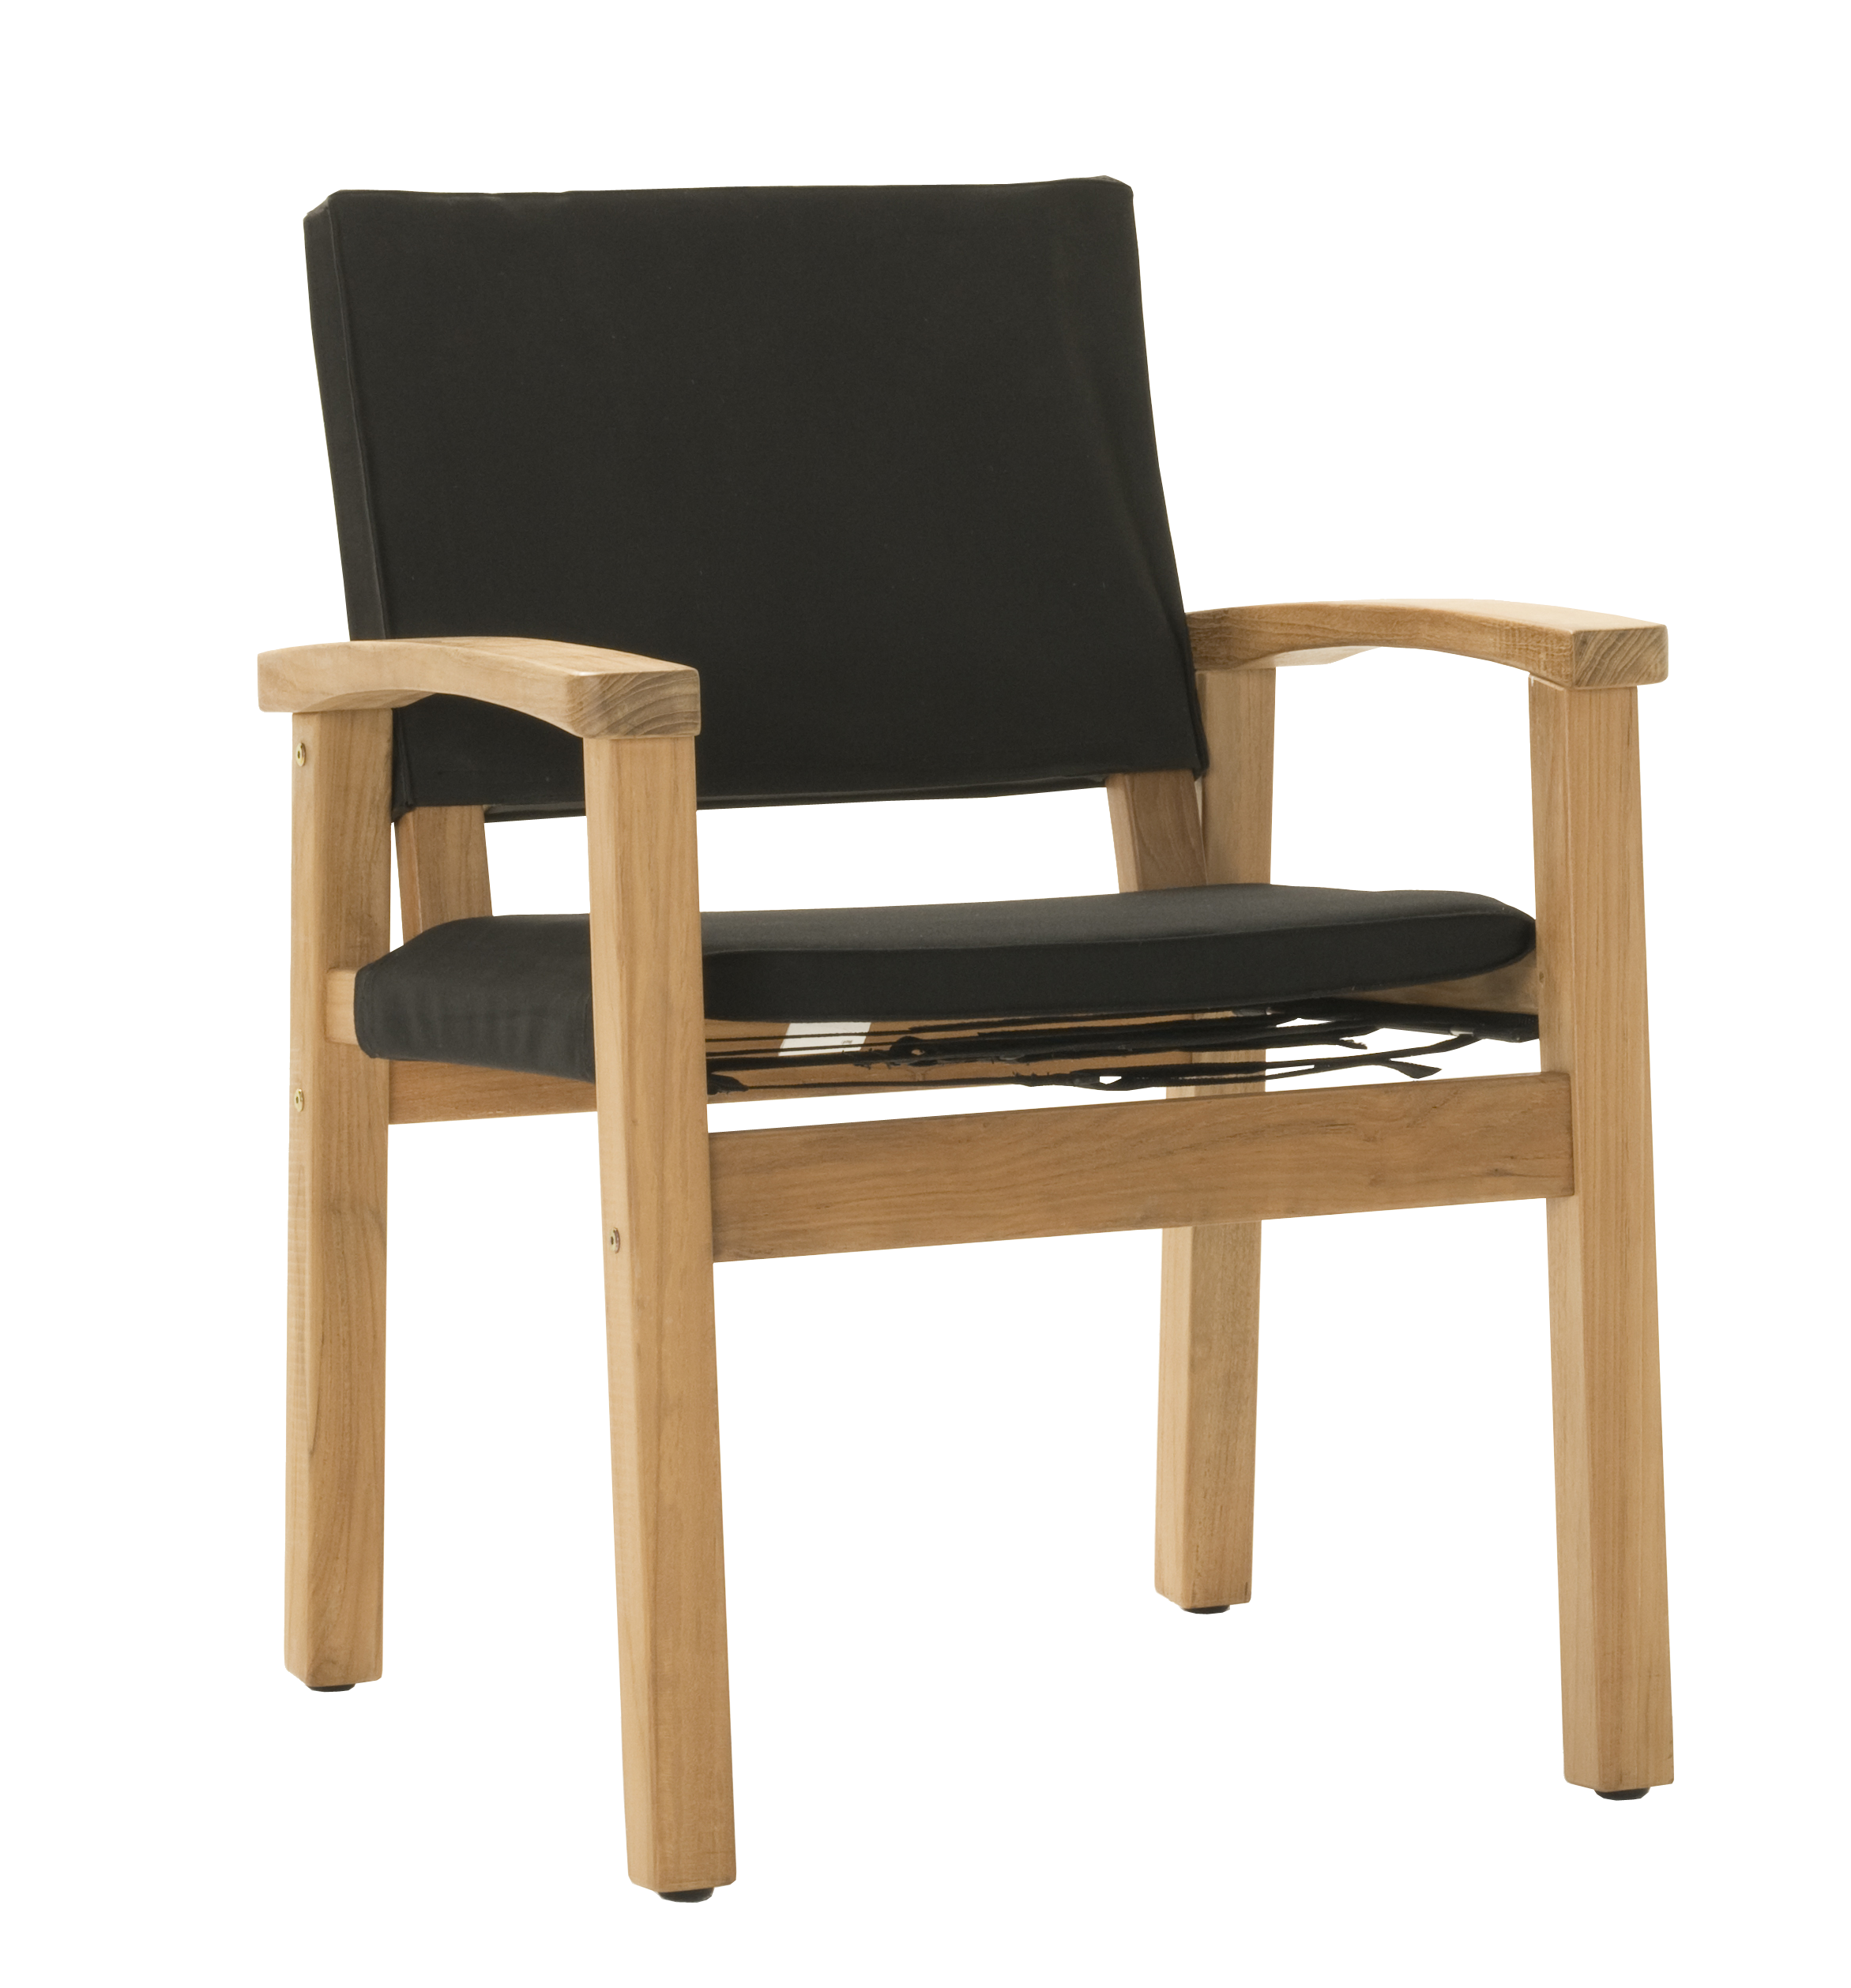 barker outdoor dining chair